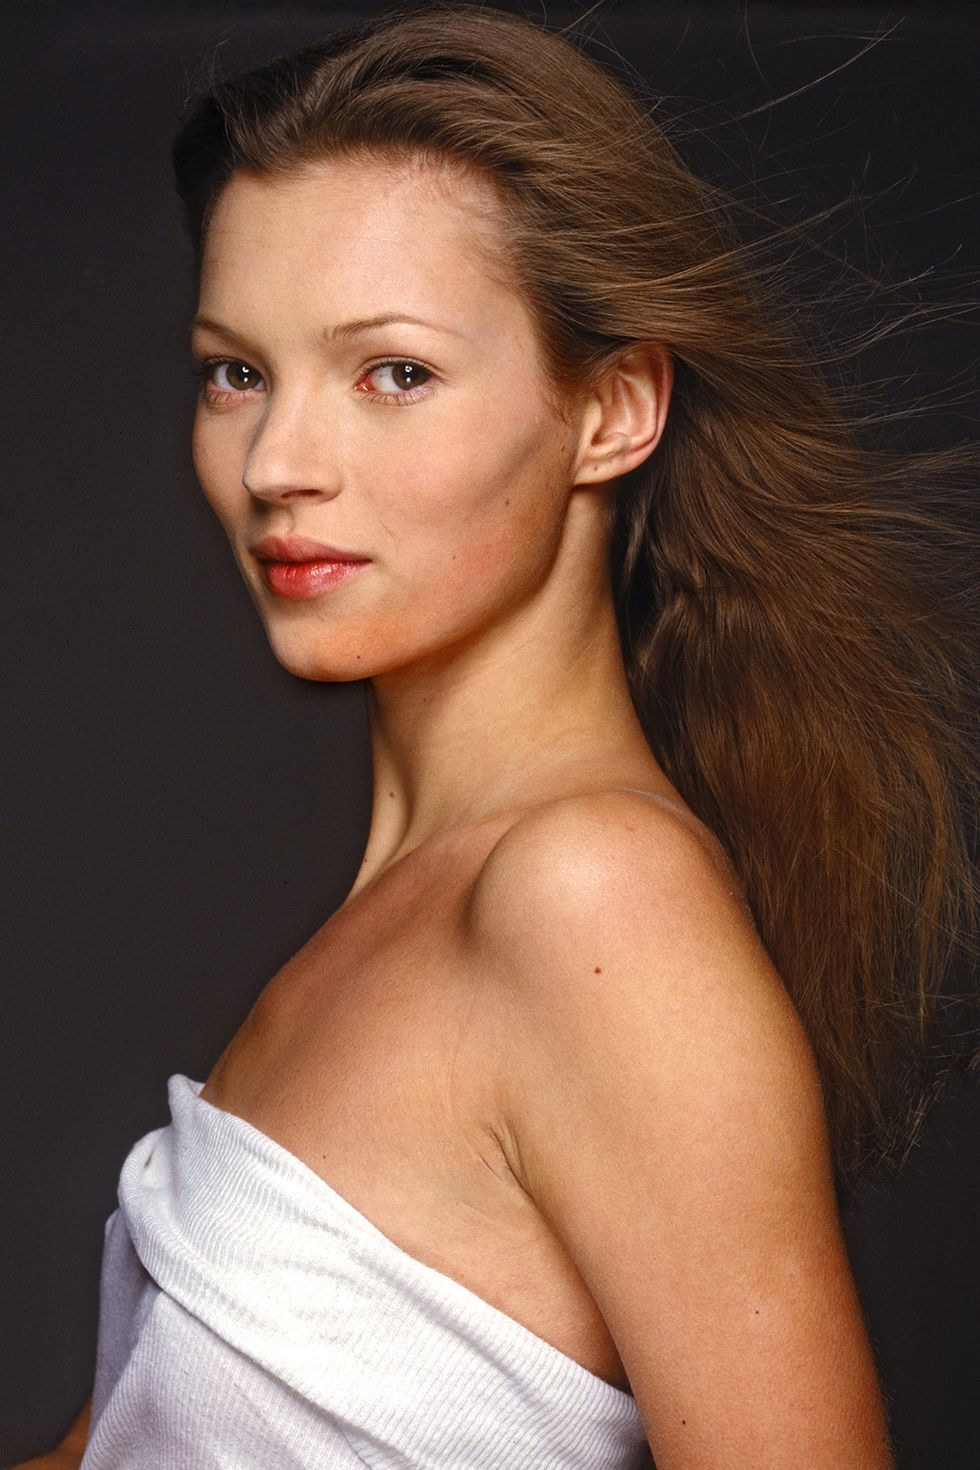 English fashion model Kate Moss, circa 1995. (Photo by Terry O'Neill/Hulton Archive/Getty Images)